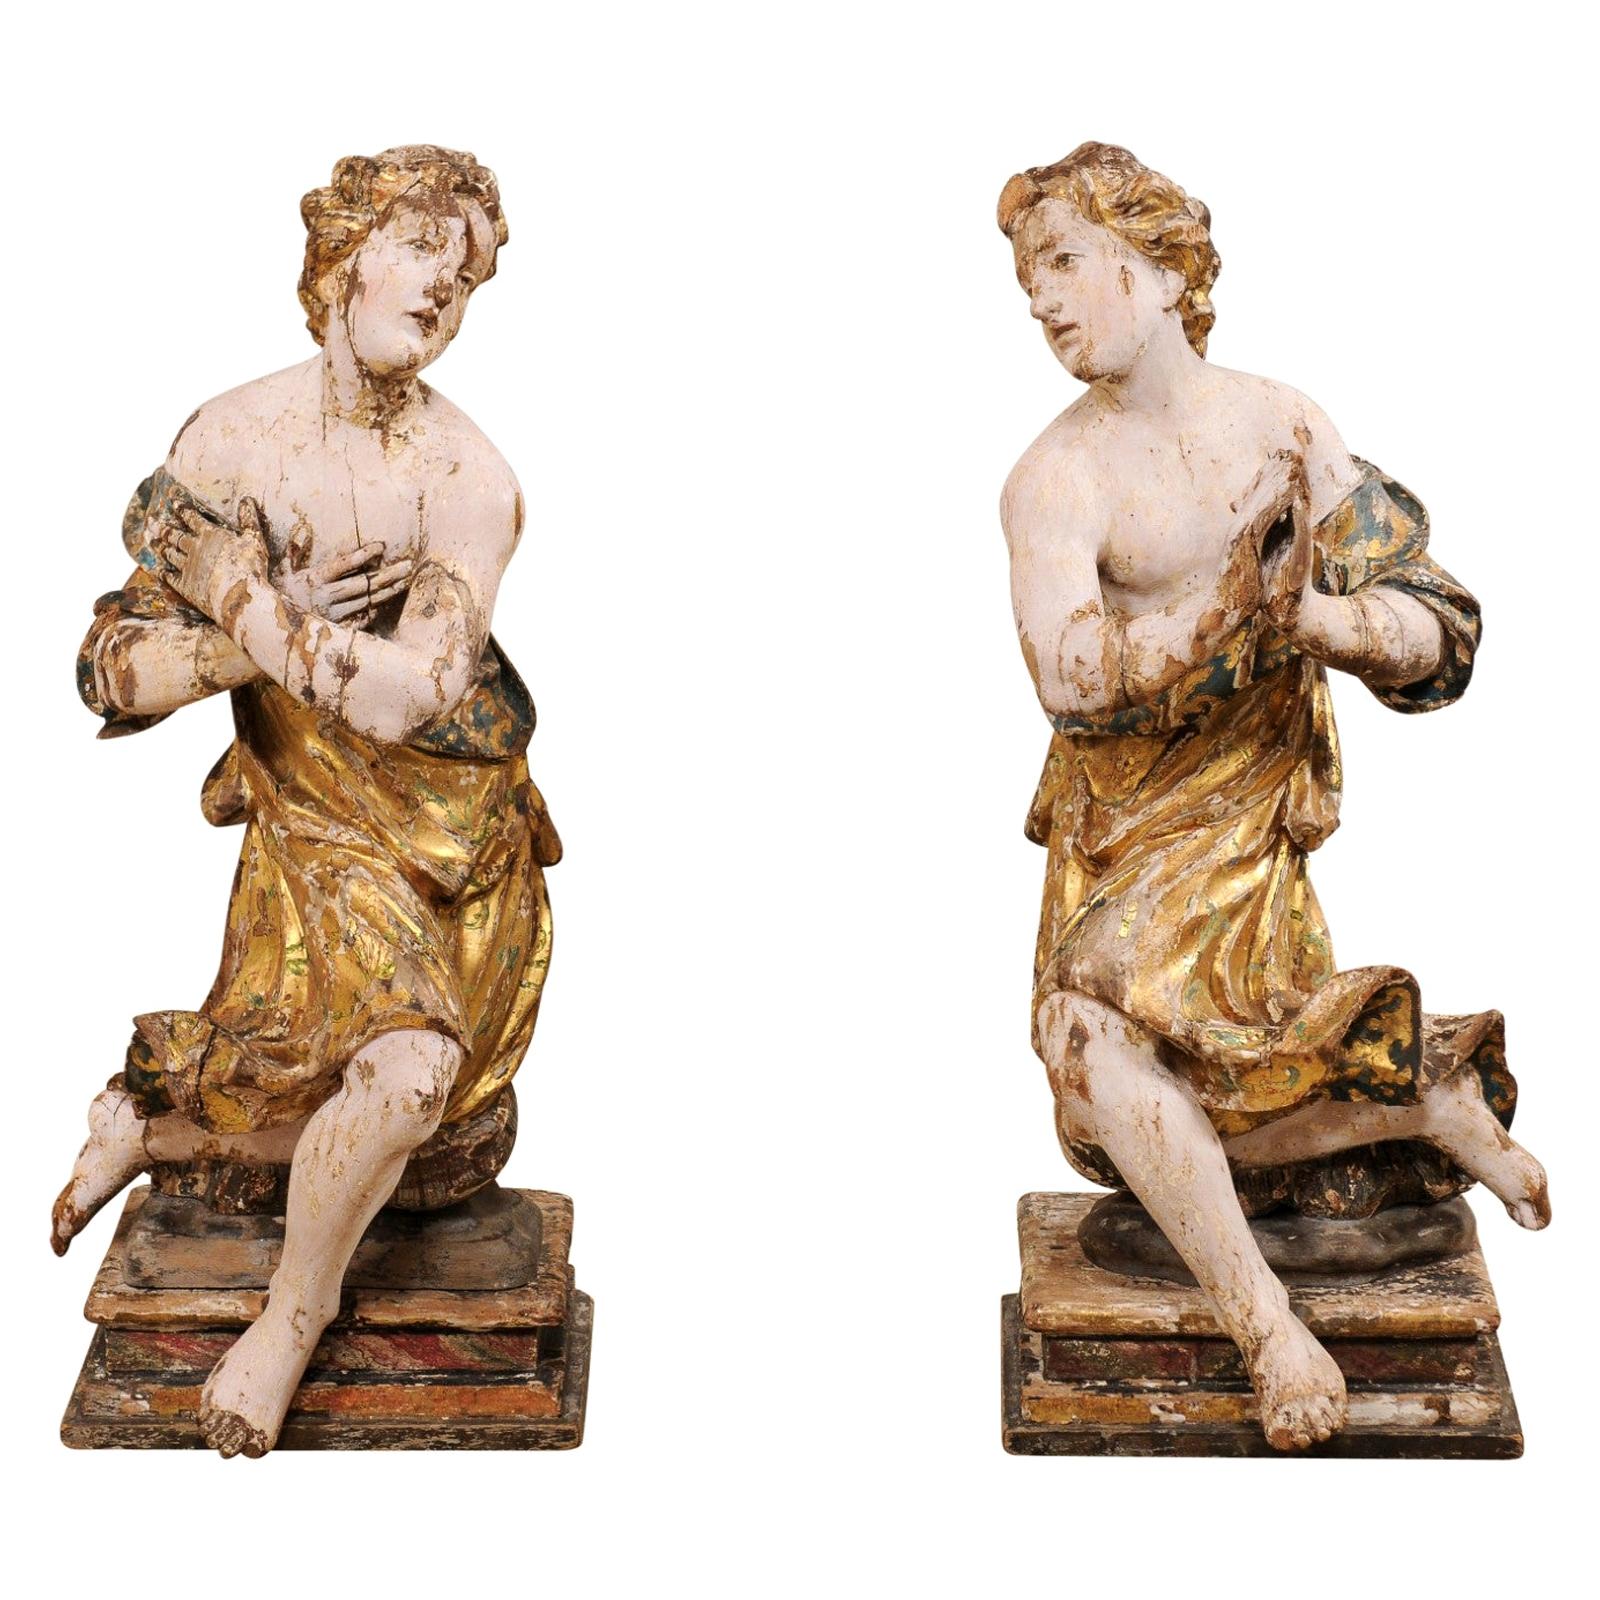 Exquisite Pair of 18th Century Italian Angelic Wood Carved Male Figures